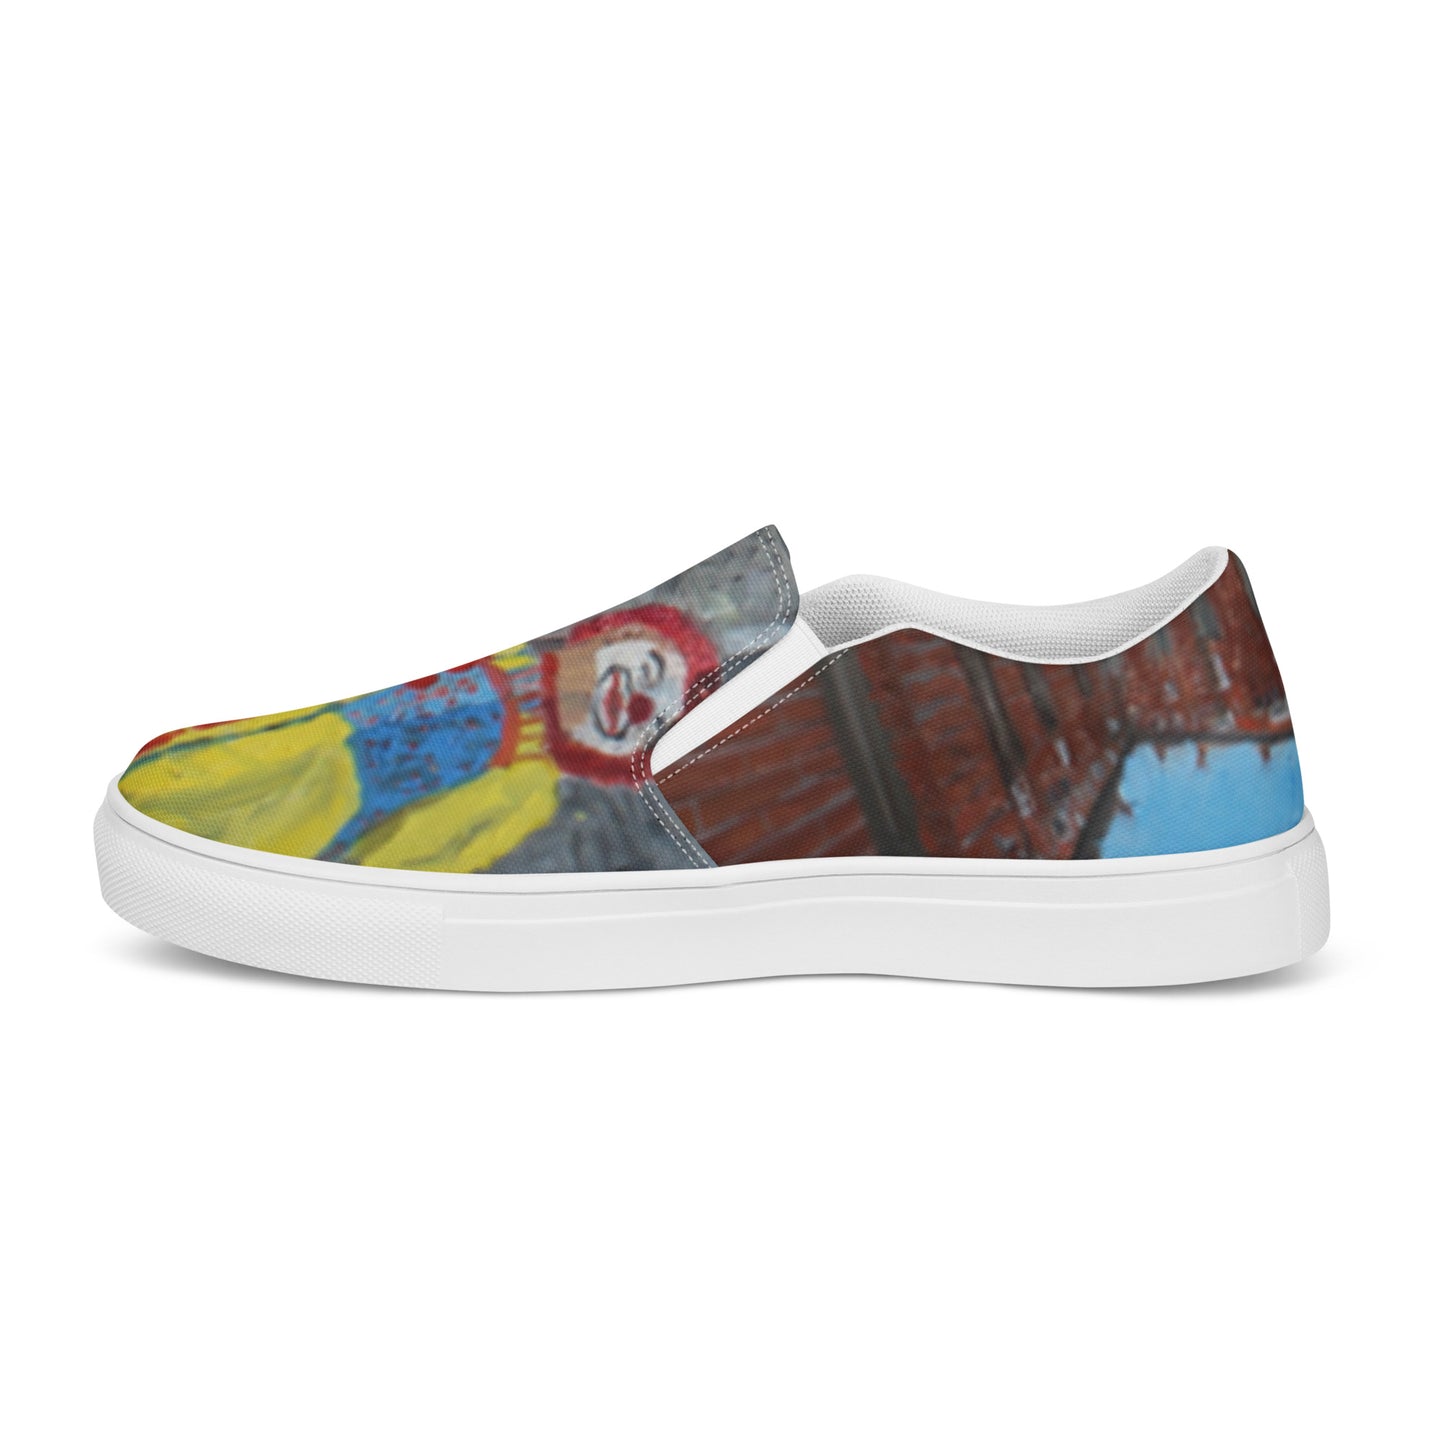 There's a Clown in the Entry - Women’s slip-on canvas shoes